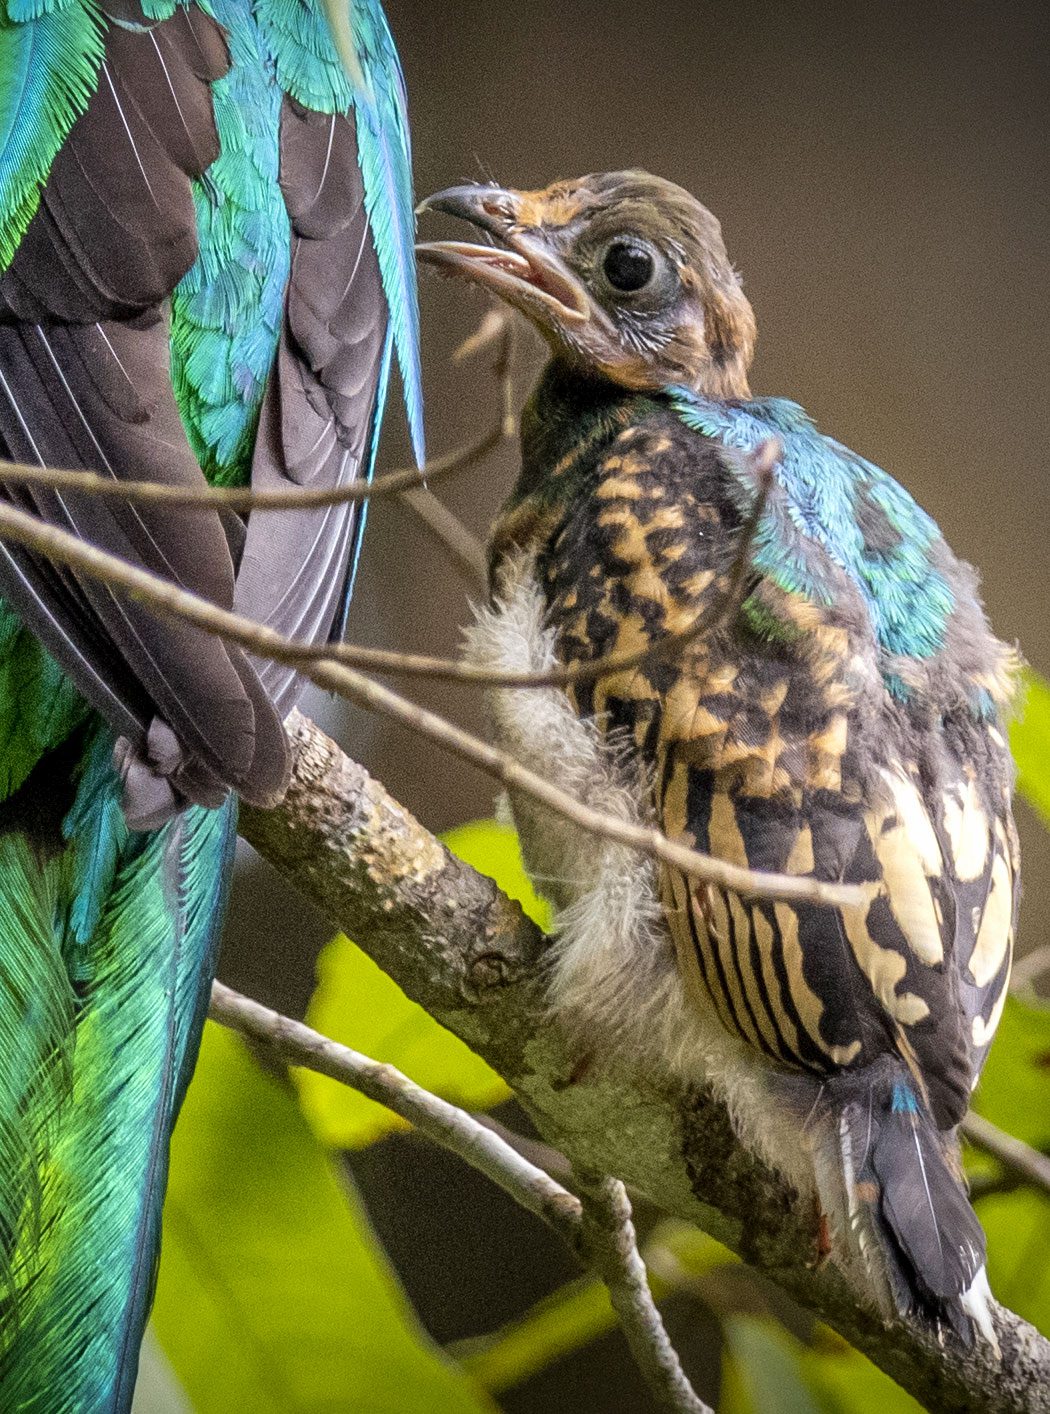 A fledgling bird just getting in iridescent feathers.